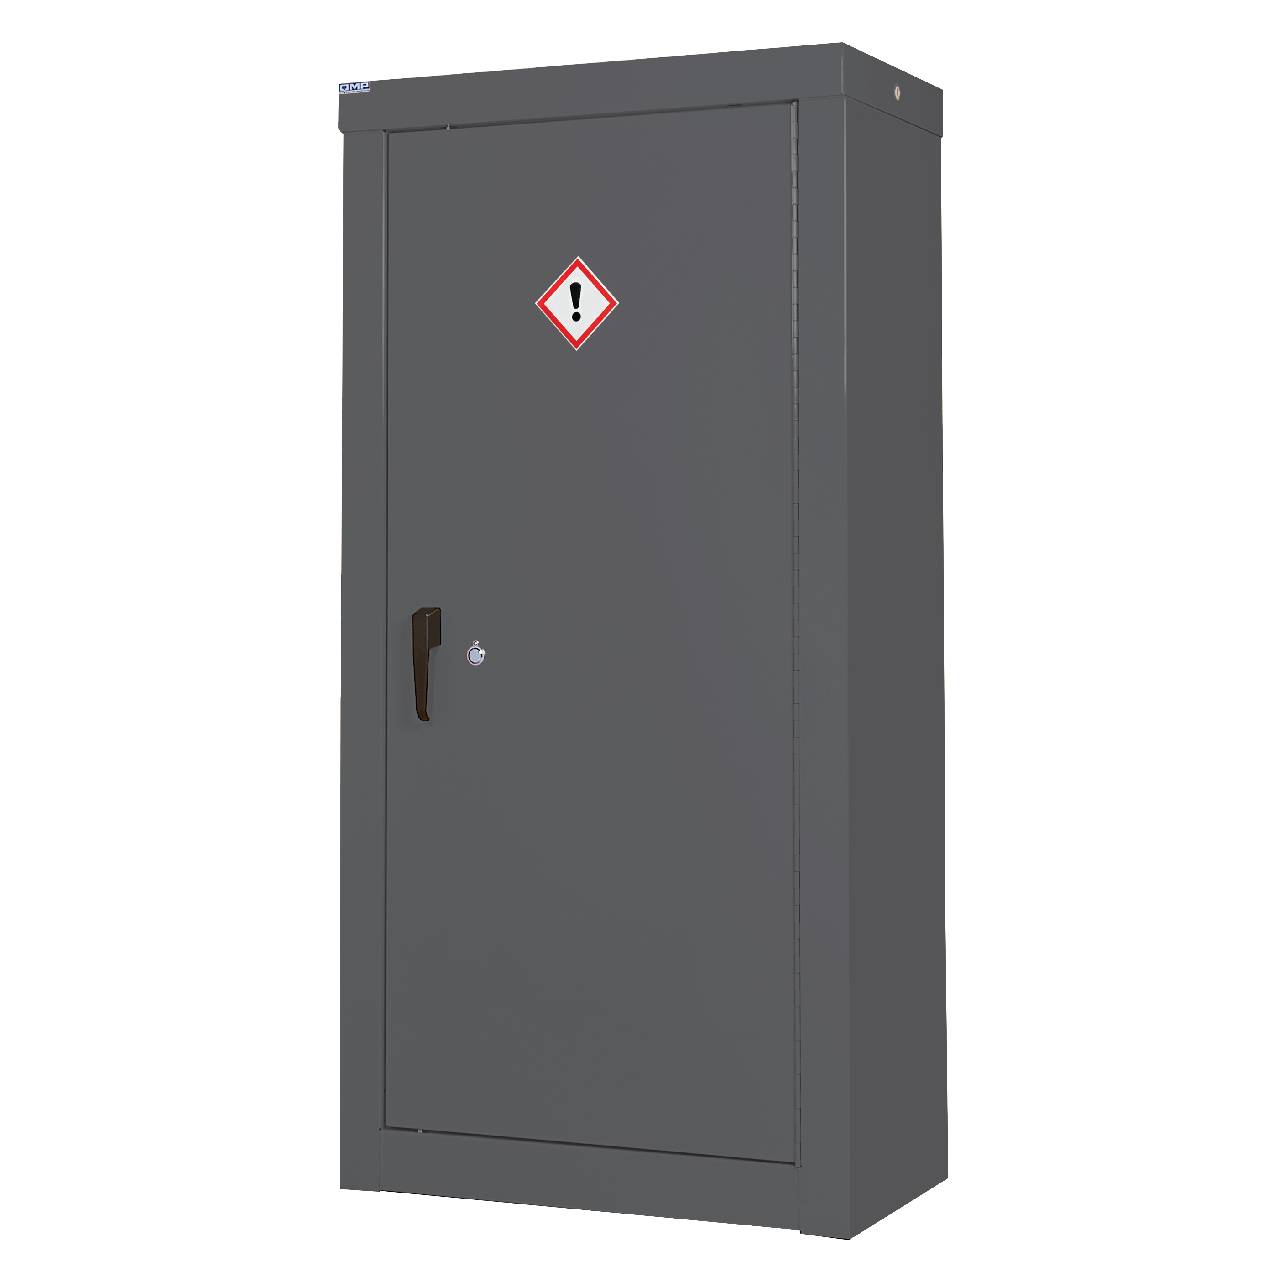 QMP COSHH Floor Standing Security Cabinets - 1800H x 900W x 460D mm